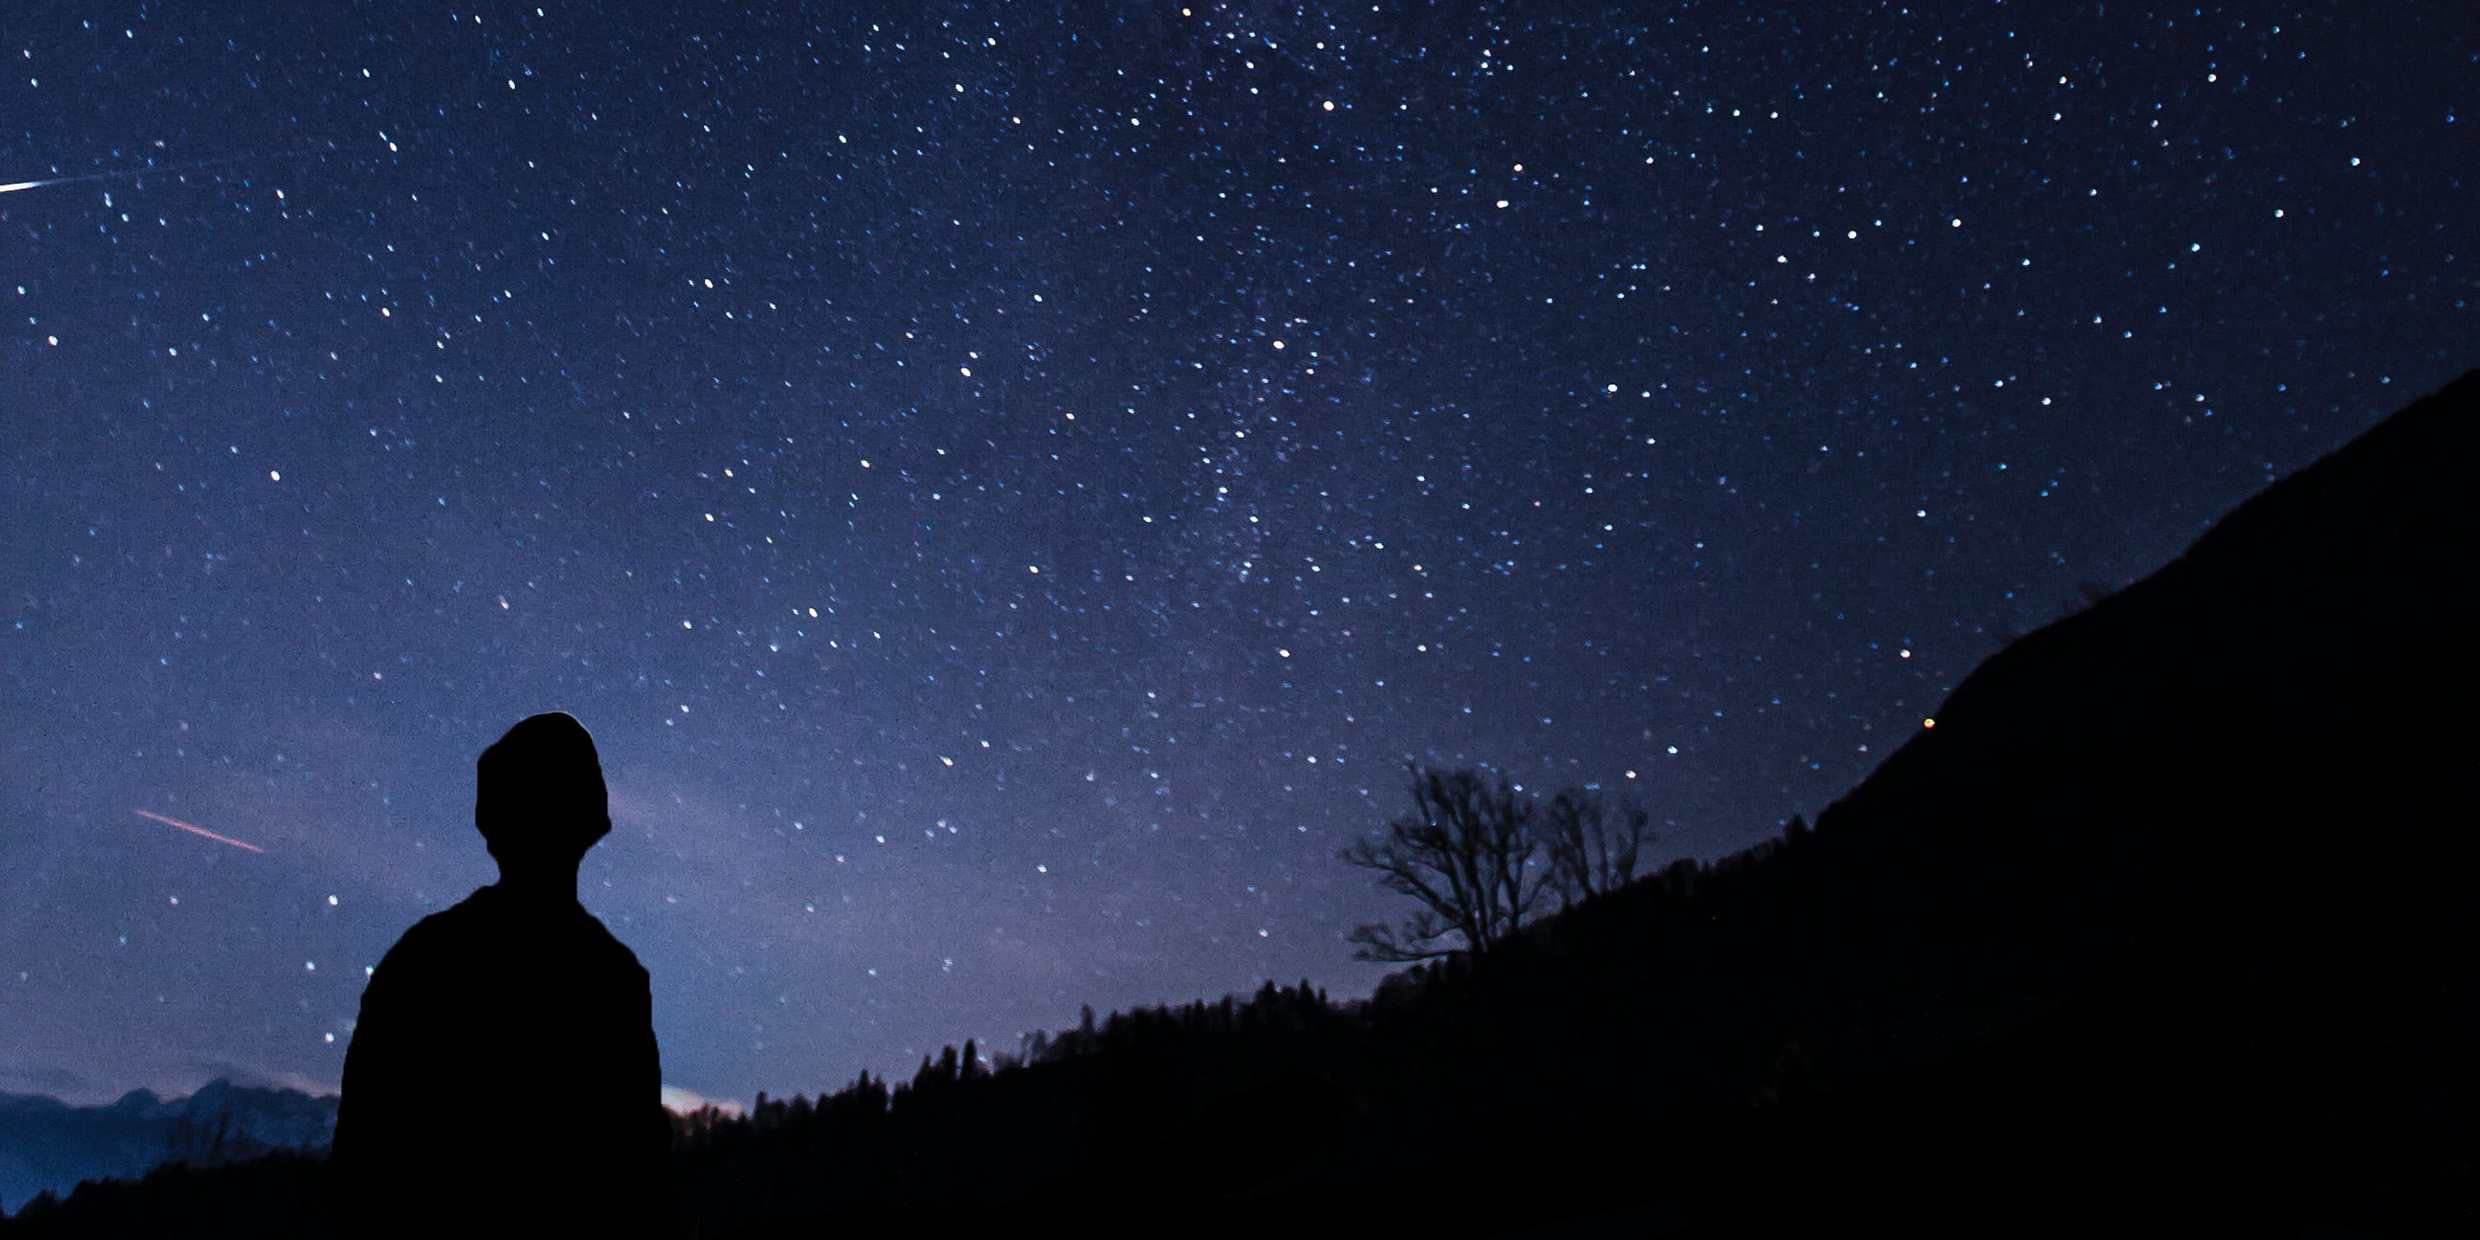 Image of a silhouetted person looking up at the night sky